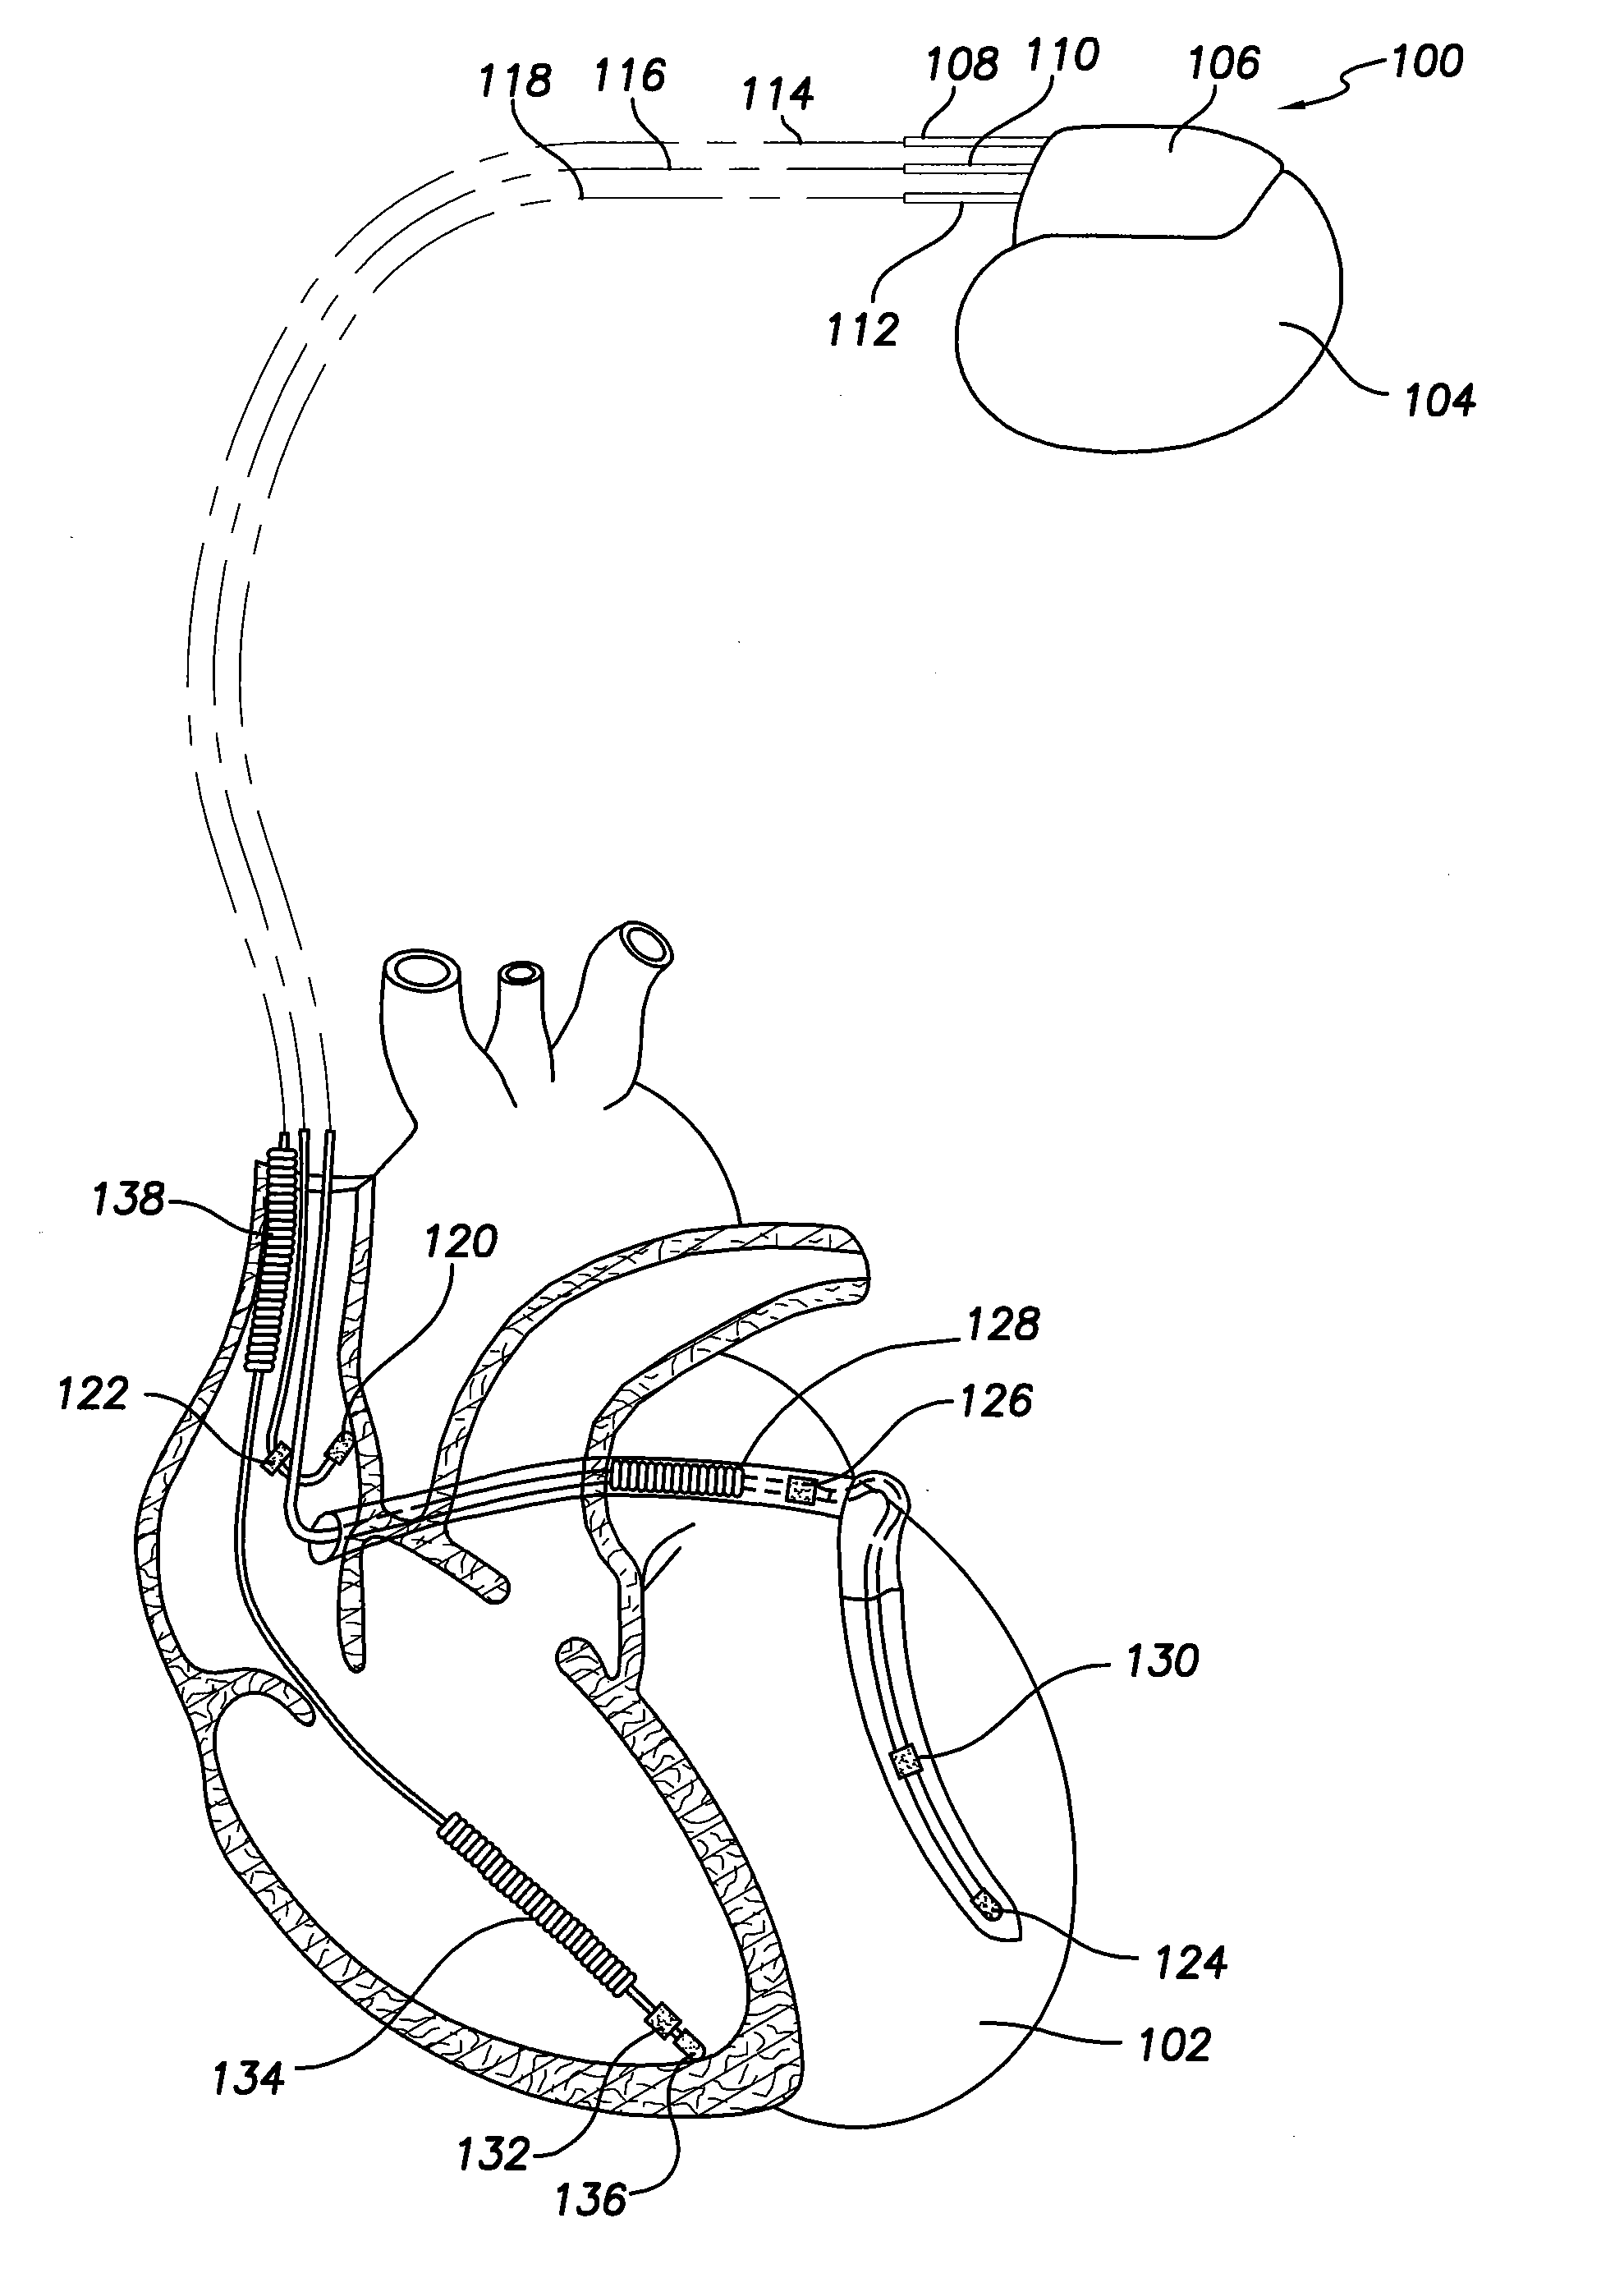 Methods and Systems for Discriminating Between Ventricular Waveforms When Ventricular Rate Exceeds Atrial Rate